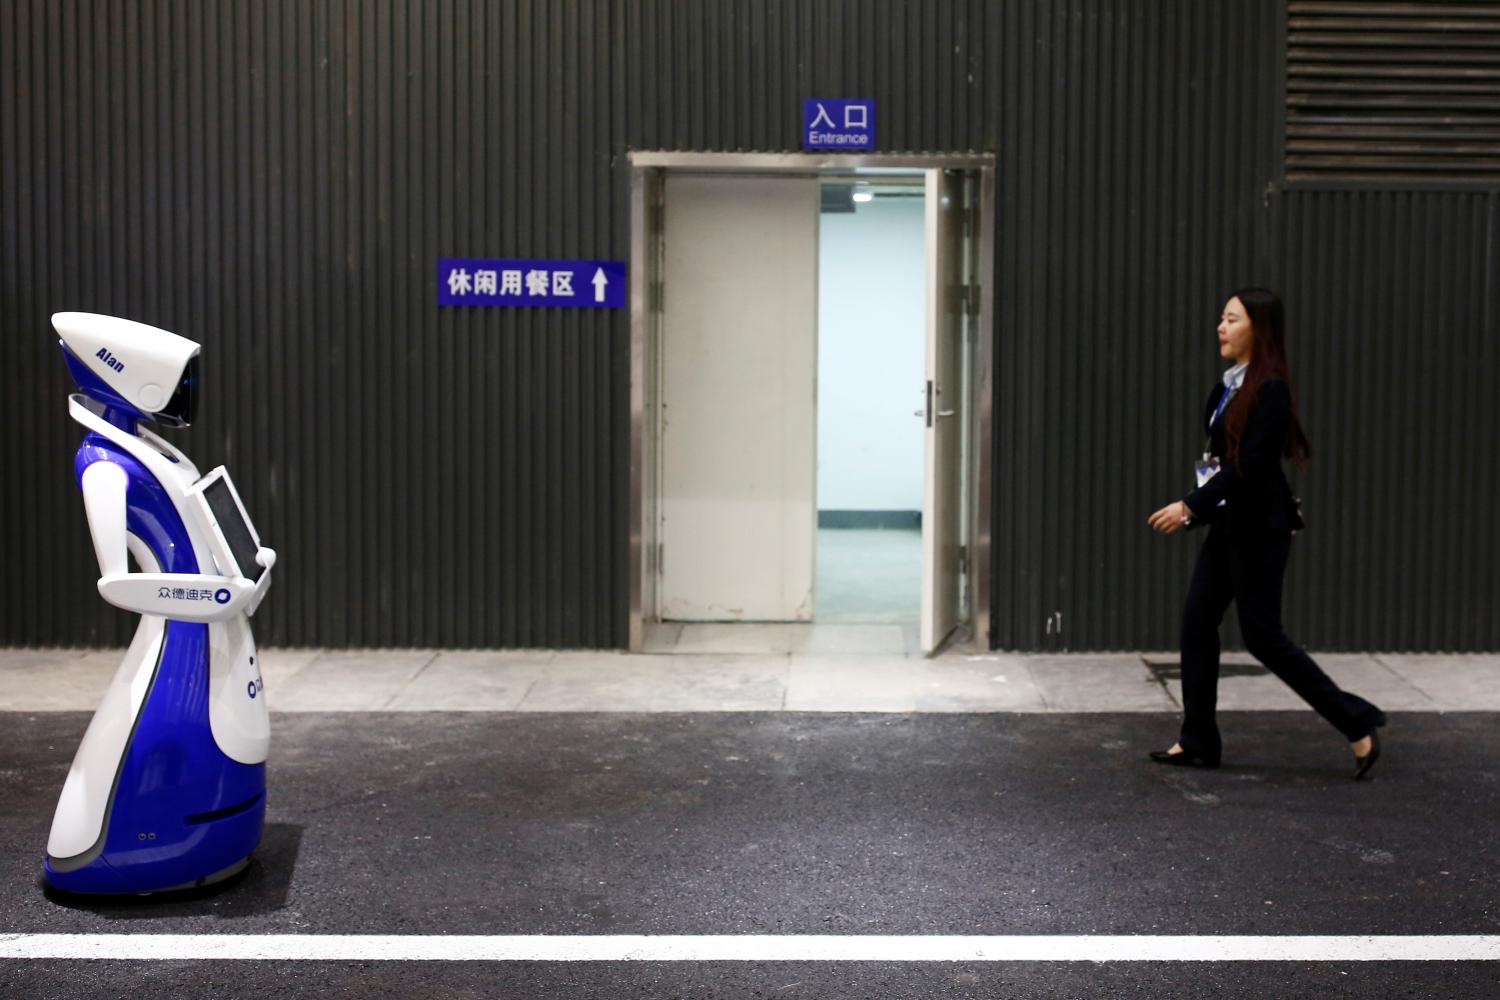 A woman walks past a robot by Robot4U Tech at the WRC 2016 World Robot Conference in Beijing, China, October 21, 2016. REUTERS/Thomas Peter - D1BEUIFGQCAA